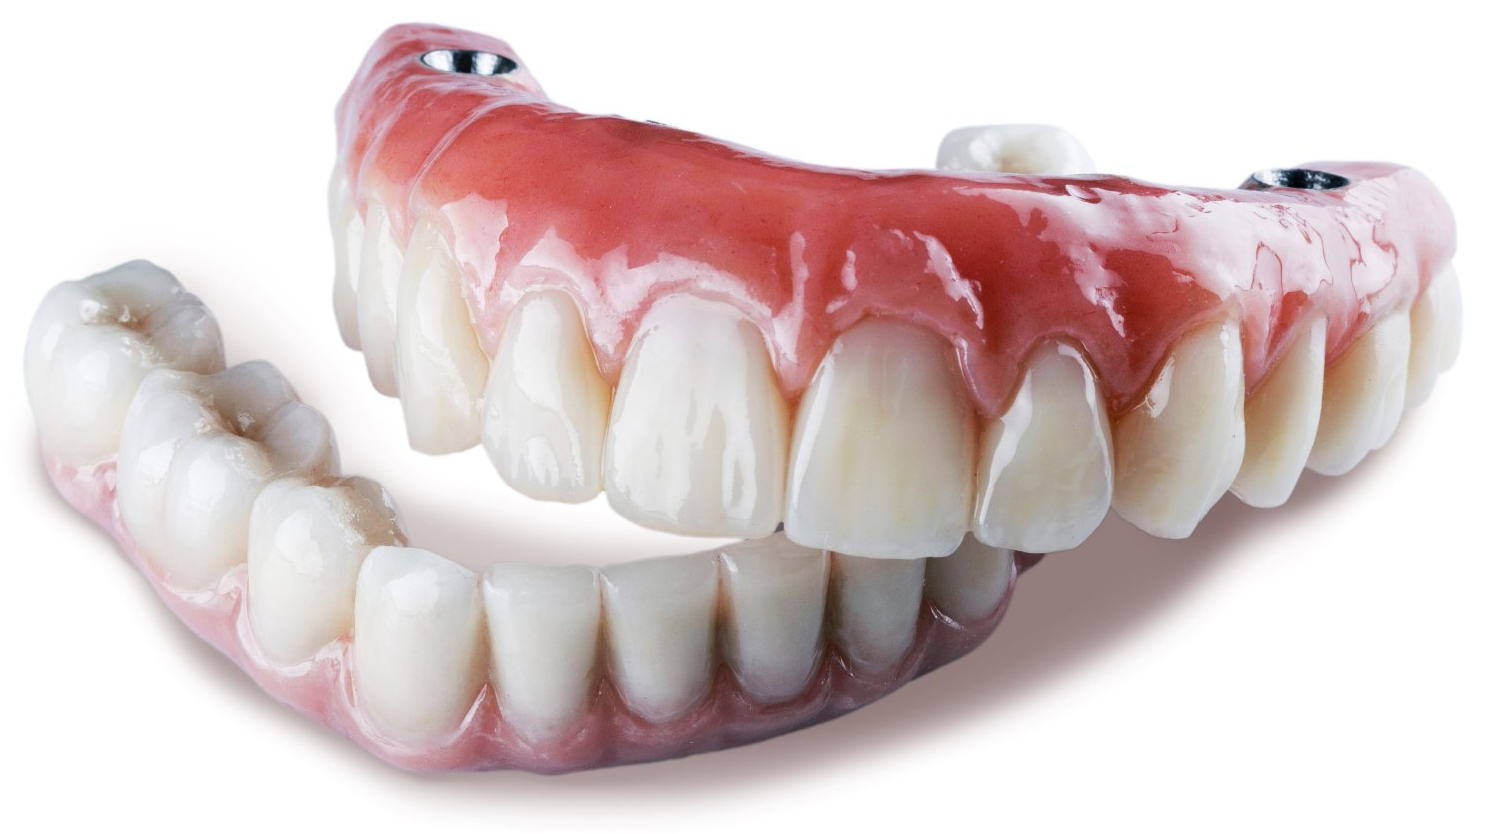 A close up of a denture on a white background